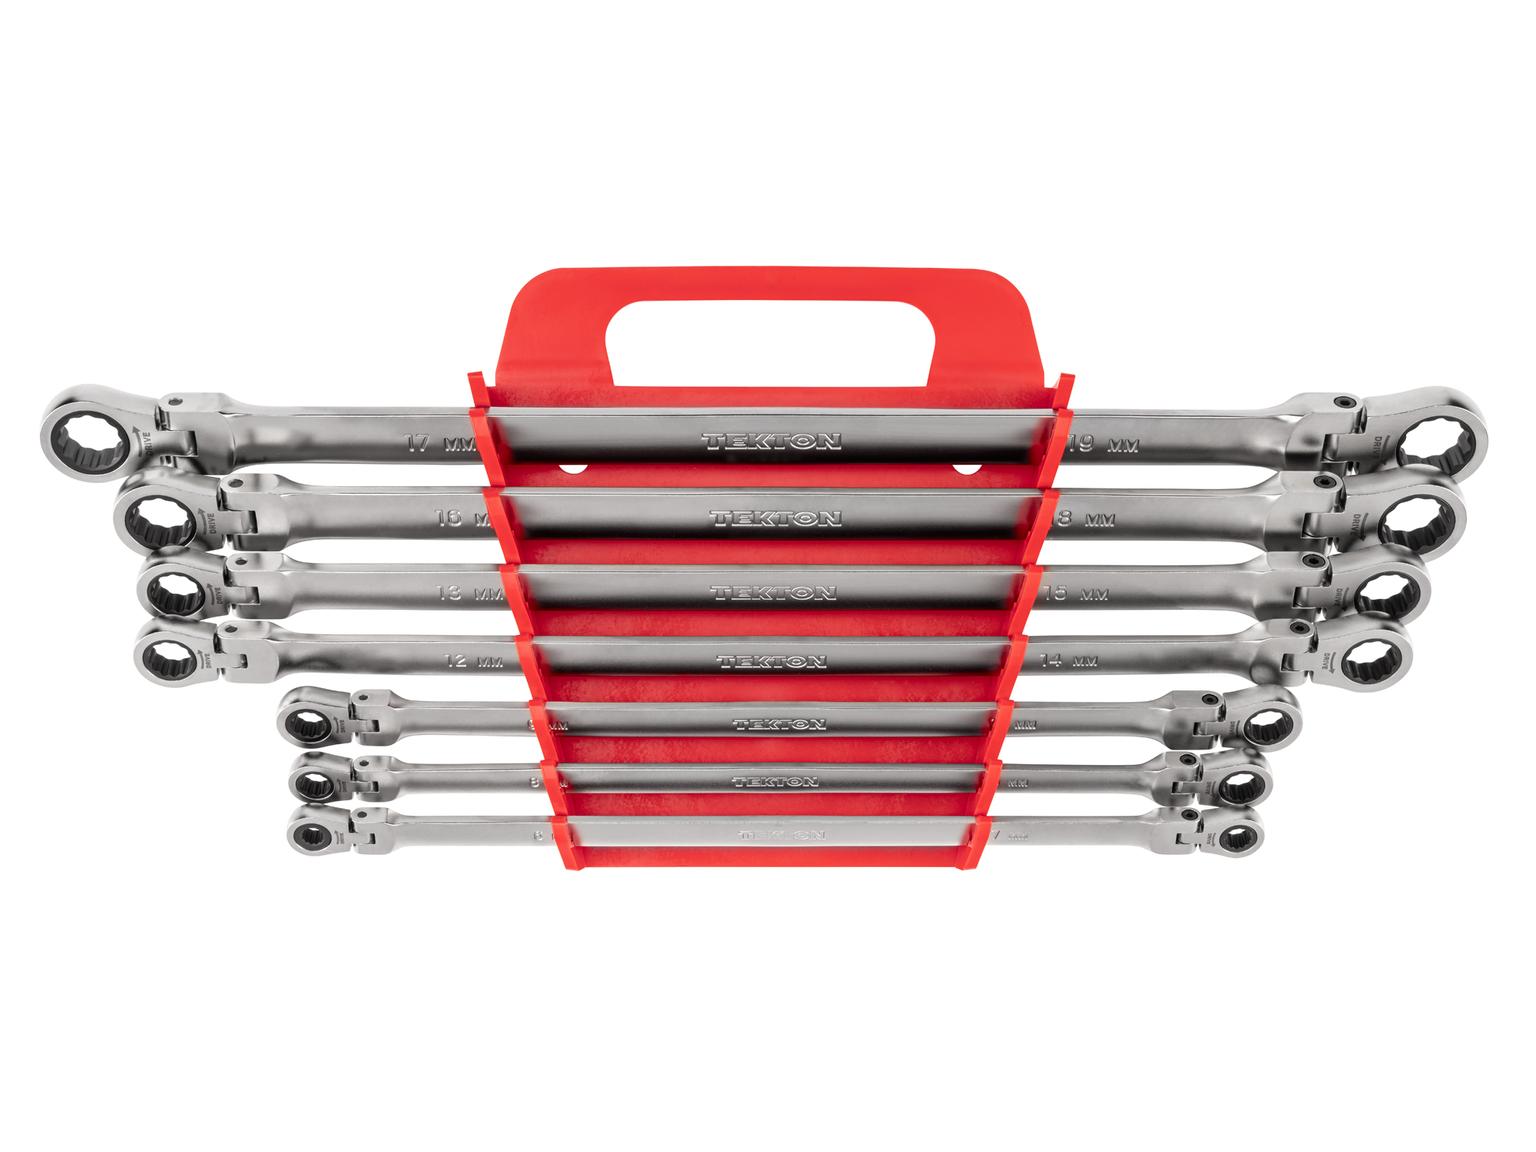 Long Flex Head 12-Point Ratcheting Box End Wrench Set, 7-Piece (Holder)